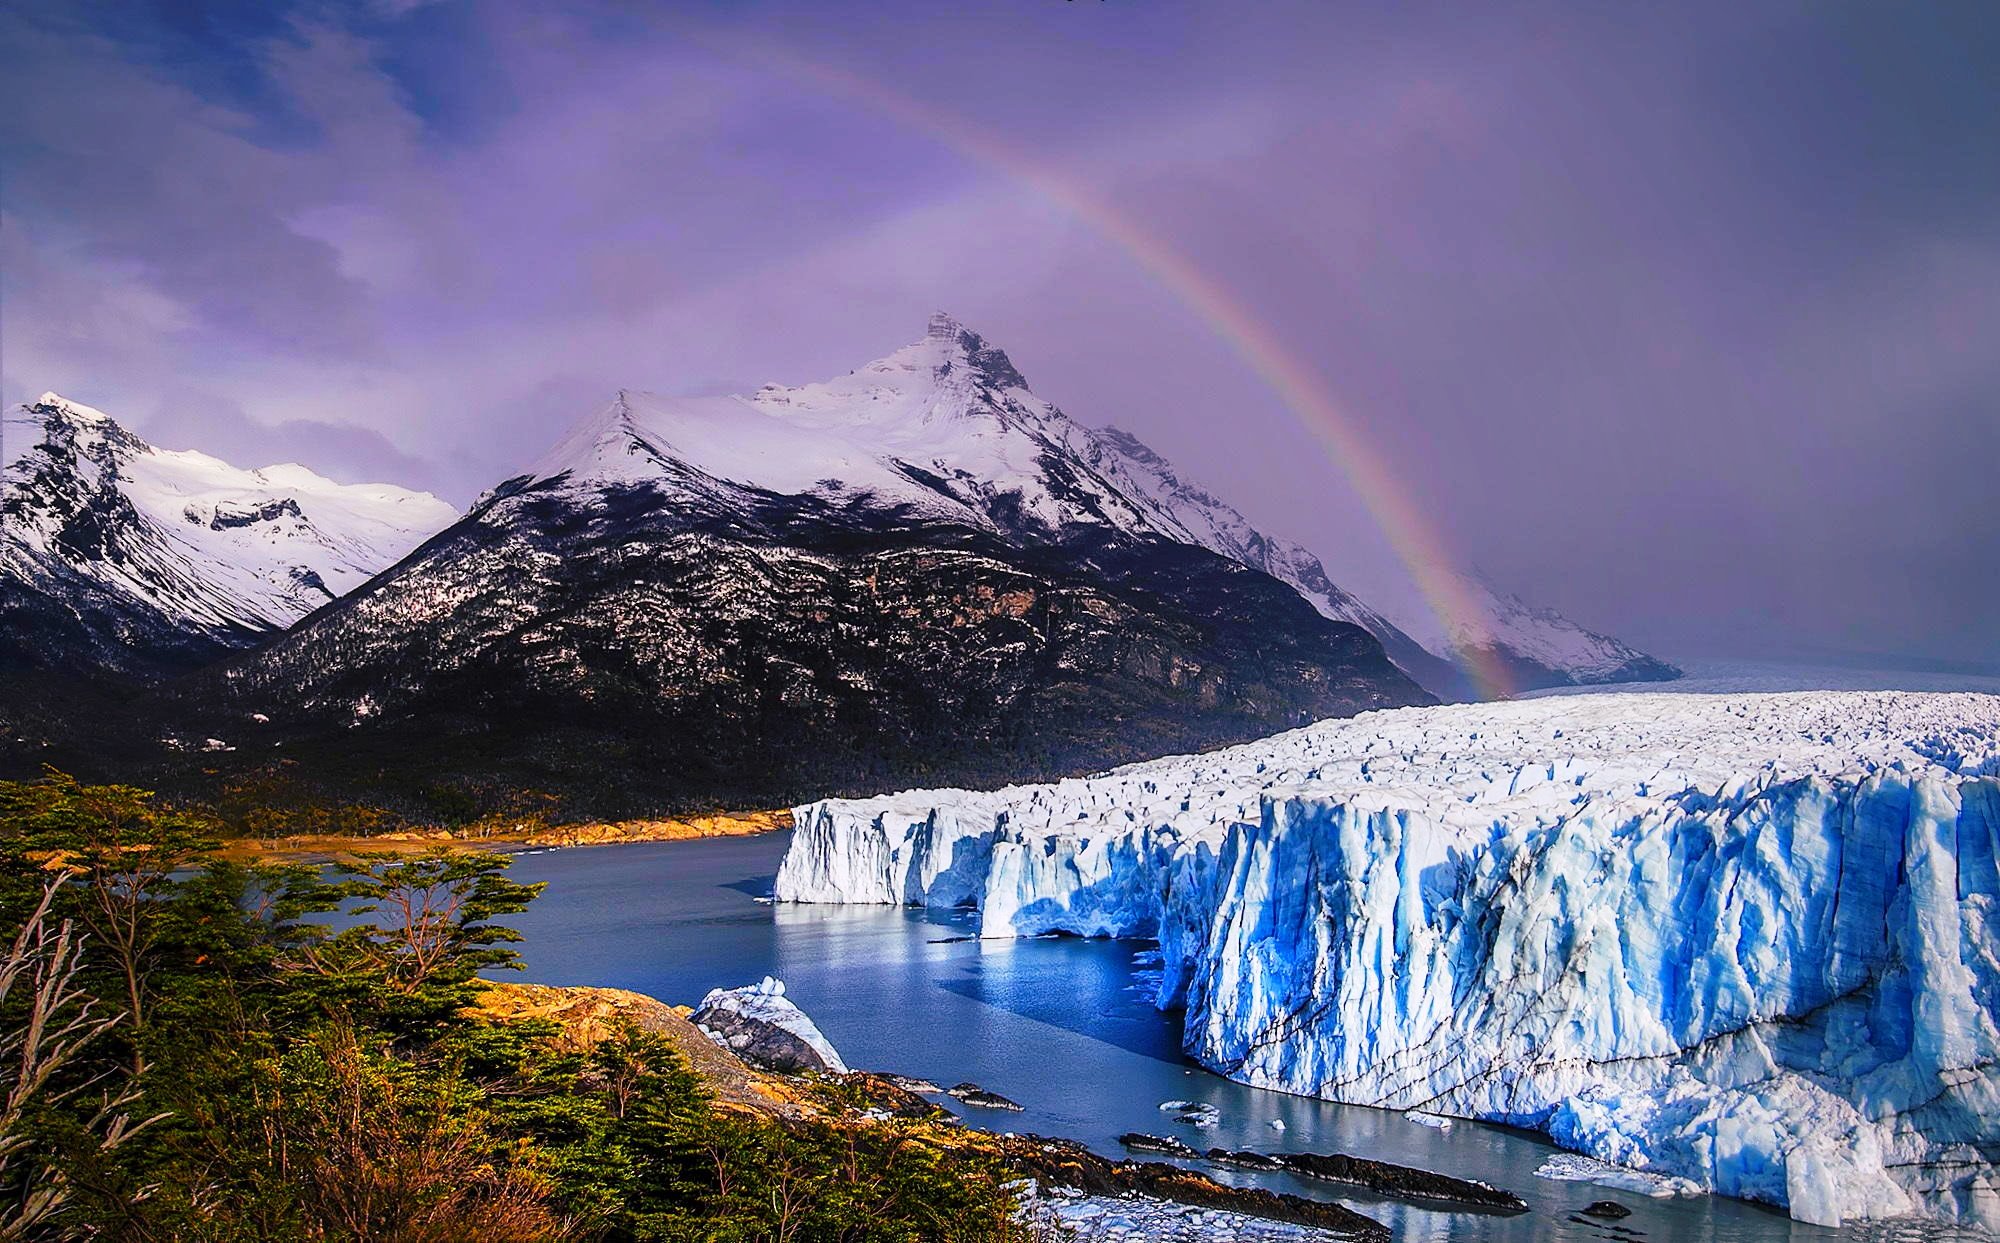 ice, clouds, Perito Moreno, rainbow, beautiful, forest, snowy peaks